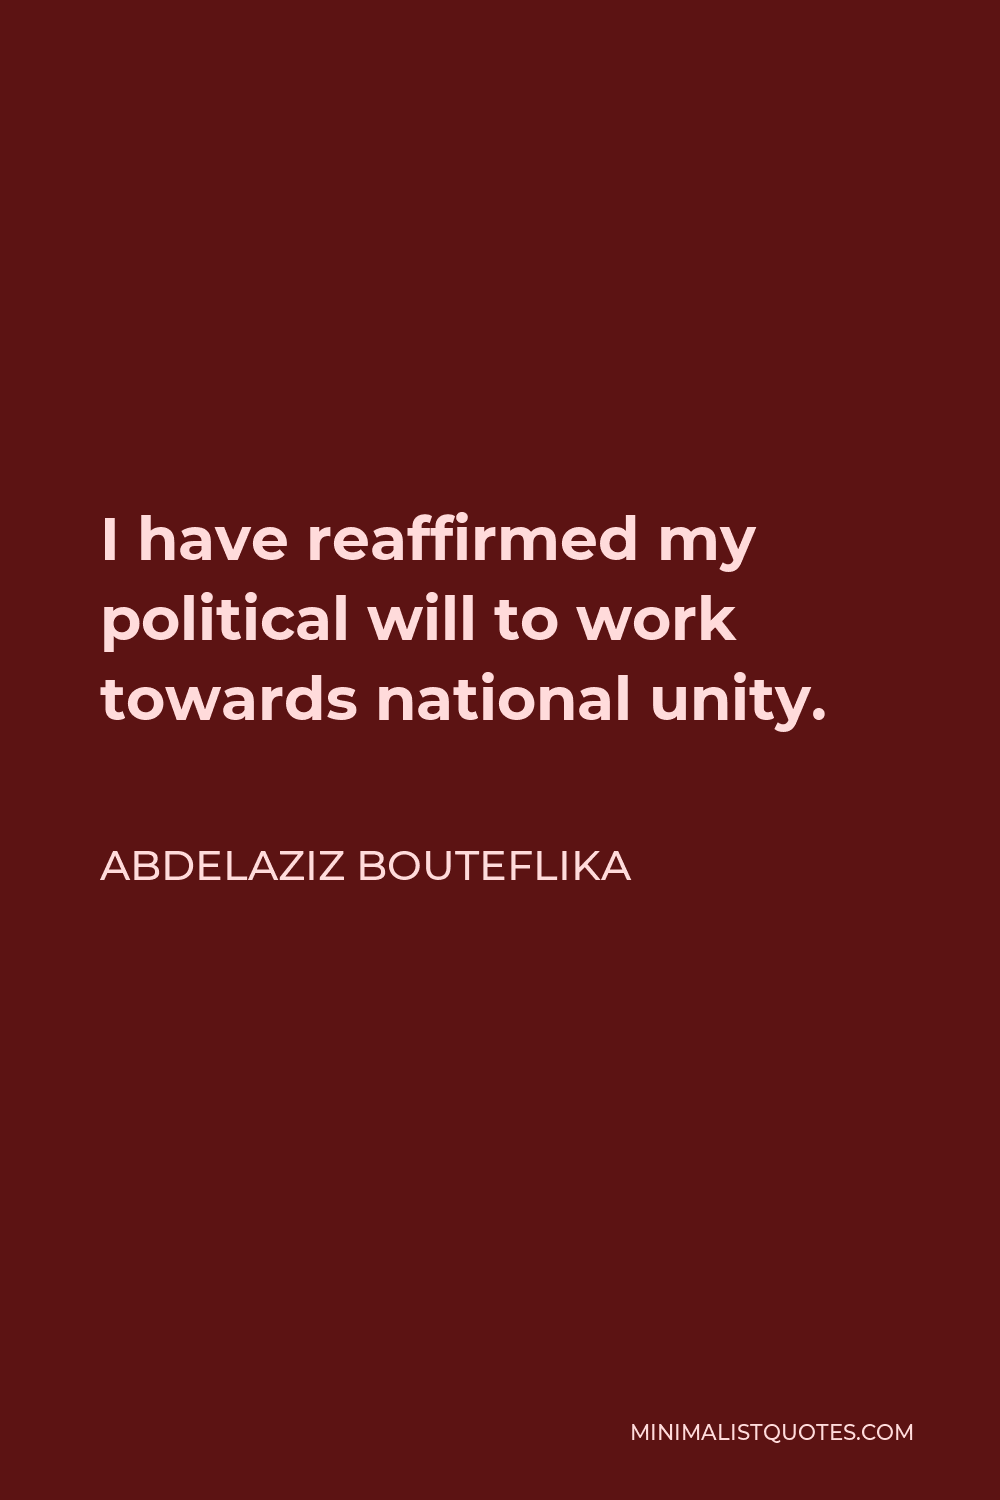 Abdelaziz Bouteflika Quote - I have reaffirmed my political will to work towards national unity.